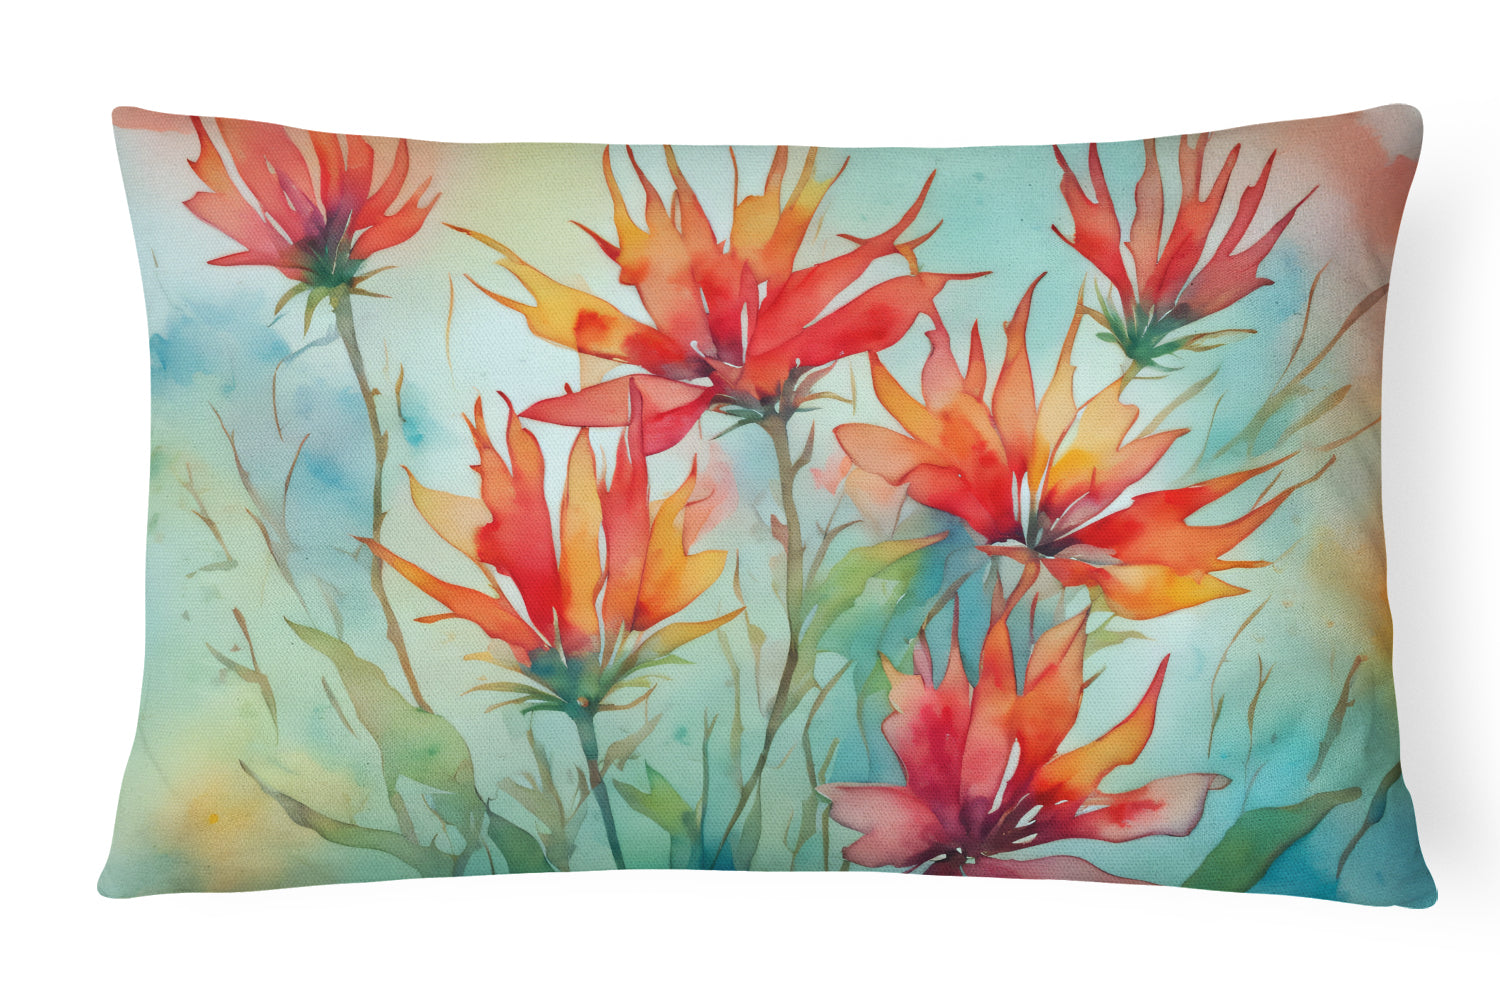 Buy this Wyoming Indian Paintbrush in Watercolor Fabric Decorative Pillow